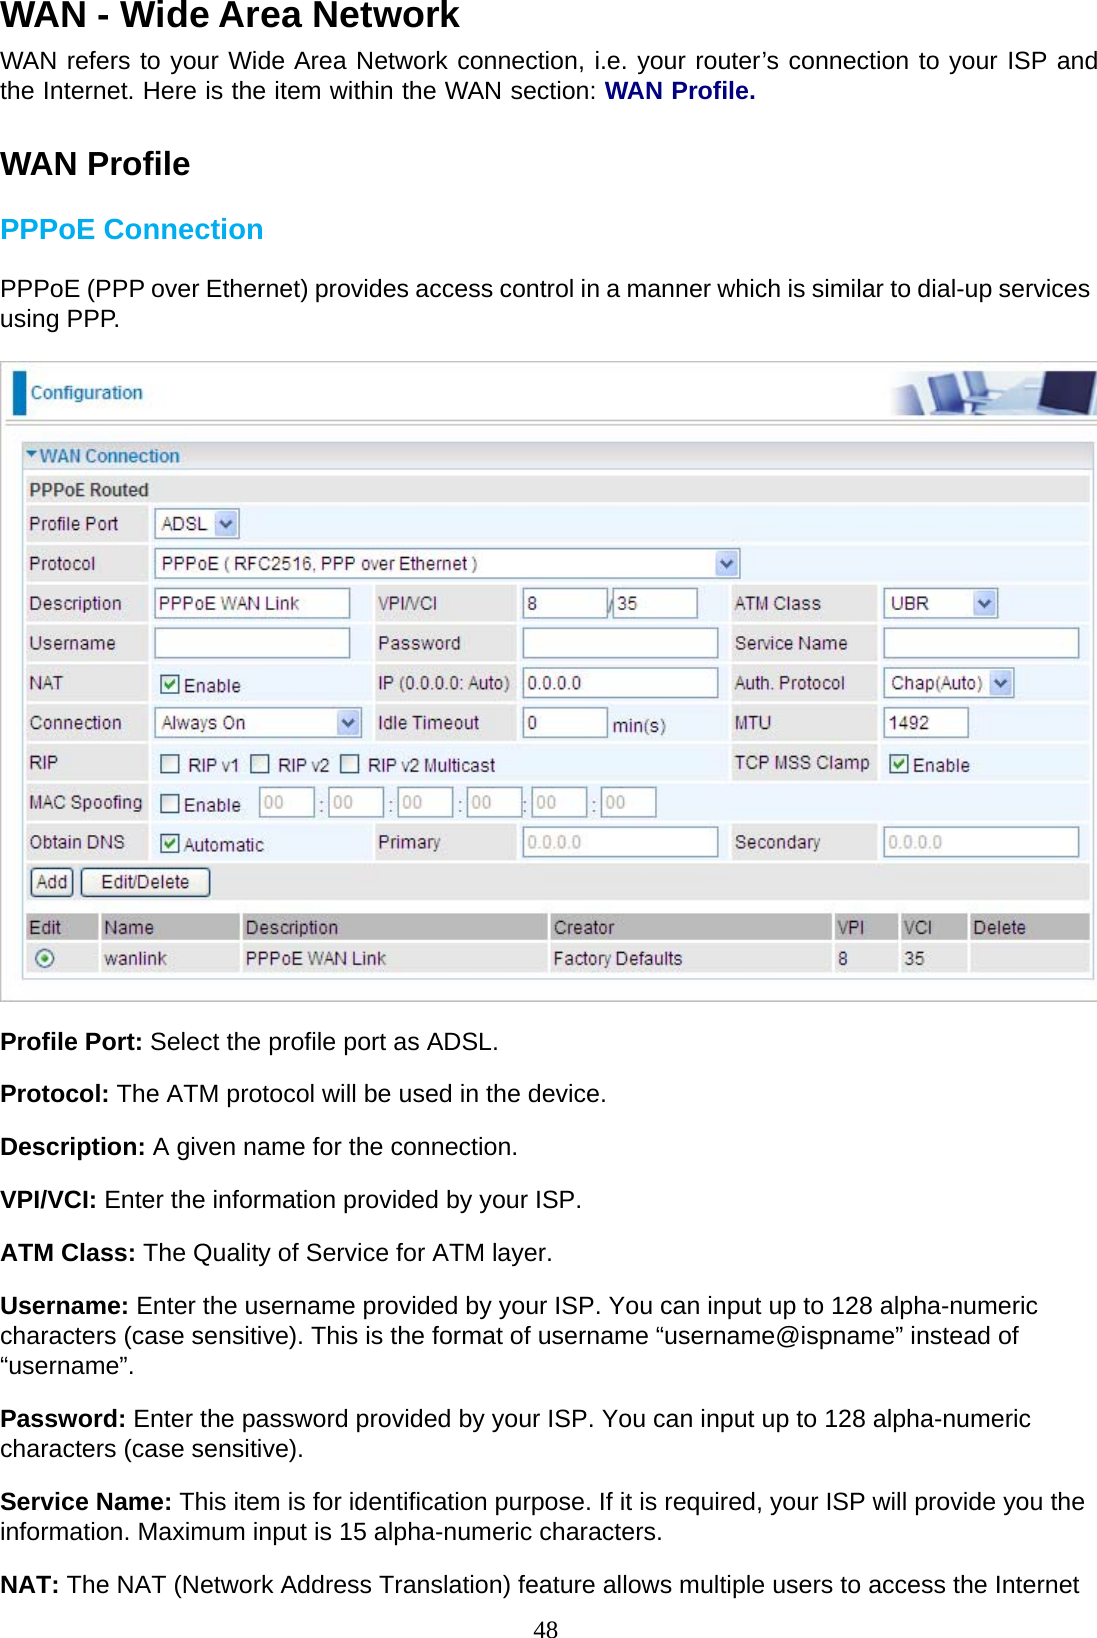 48 WAN - Wide Area Network  WAN refers to your Wide Area Network connection, i.e. your router’s connection to your ISP and the Internet. Here is the item within the WAN section: WAN Profile.   WAN Profile  PPPoE Connection  PPPoE (PPP over Ethernet) provides access control in a manner which is similar to dial-up services using PPP.    Profile Port: Select the profile port as ADSL.  Protocol: The ATM protocol will be used in the device. Description: A given name for the connection.  VPI/VCI: Enter the information provided by your ISP. ATM Class: The Quality of Service for ATM layer. Username: Enter the username provided by your ISP. You can input up to 128 alpha-numeric characters (case sensitive). This is the format of username “username@ispname” instead of “username”.  Password: Enter the password provided by your ISP. You can input up to 128 alpha-numeric characters (case sensitive).  Service Name: This item is for identification purpose. If it is required, your ISP will provide you the information. Maximum input is 15 alpha-numeric characters.  NAT: The NAT (Network Address Translation) feature allows multiple users to access the Internet 